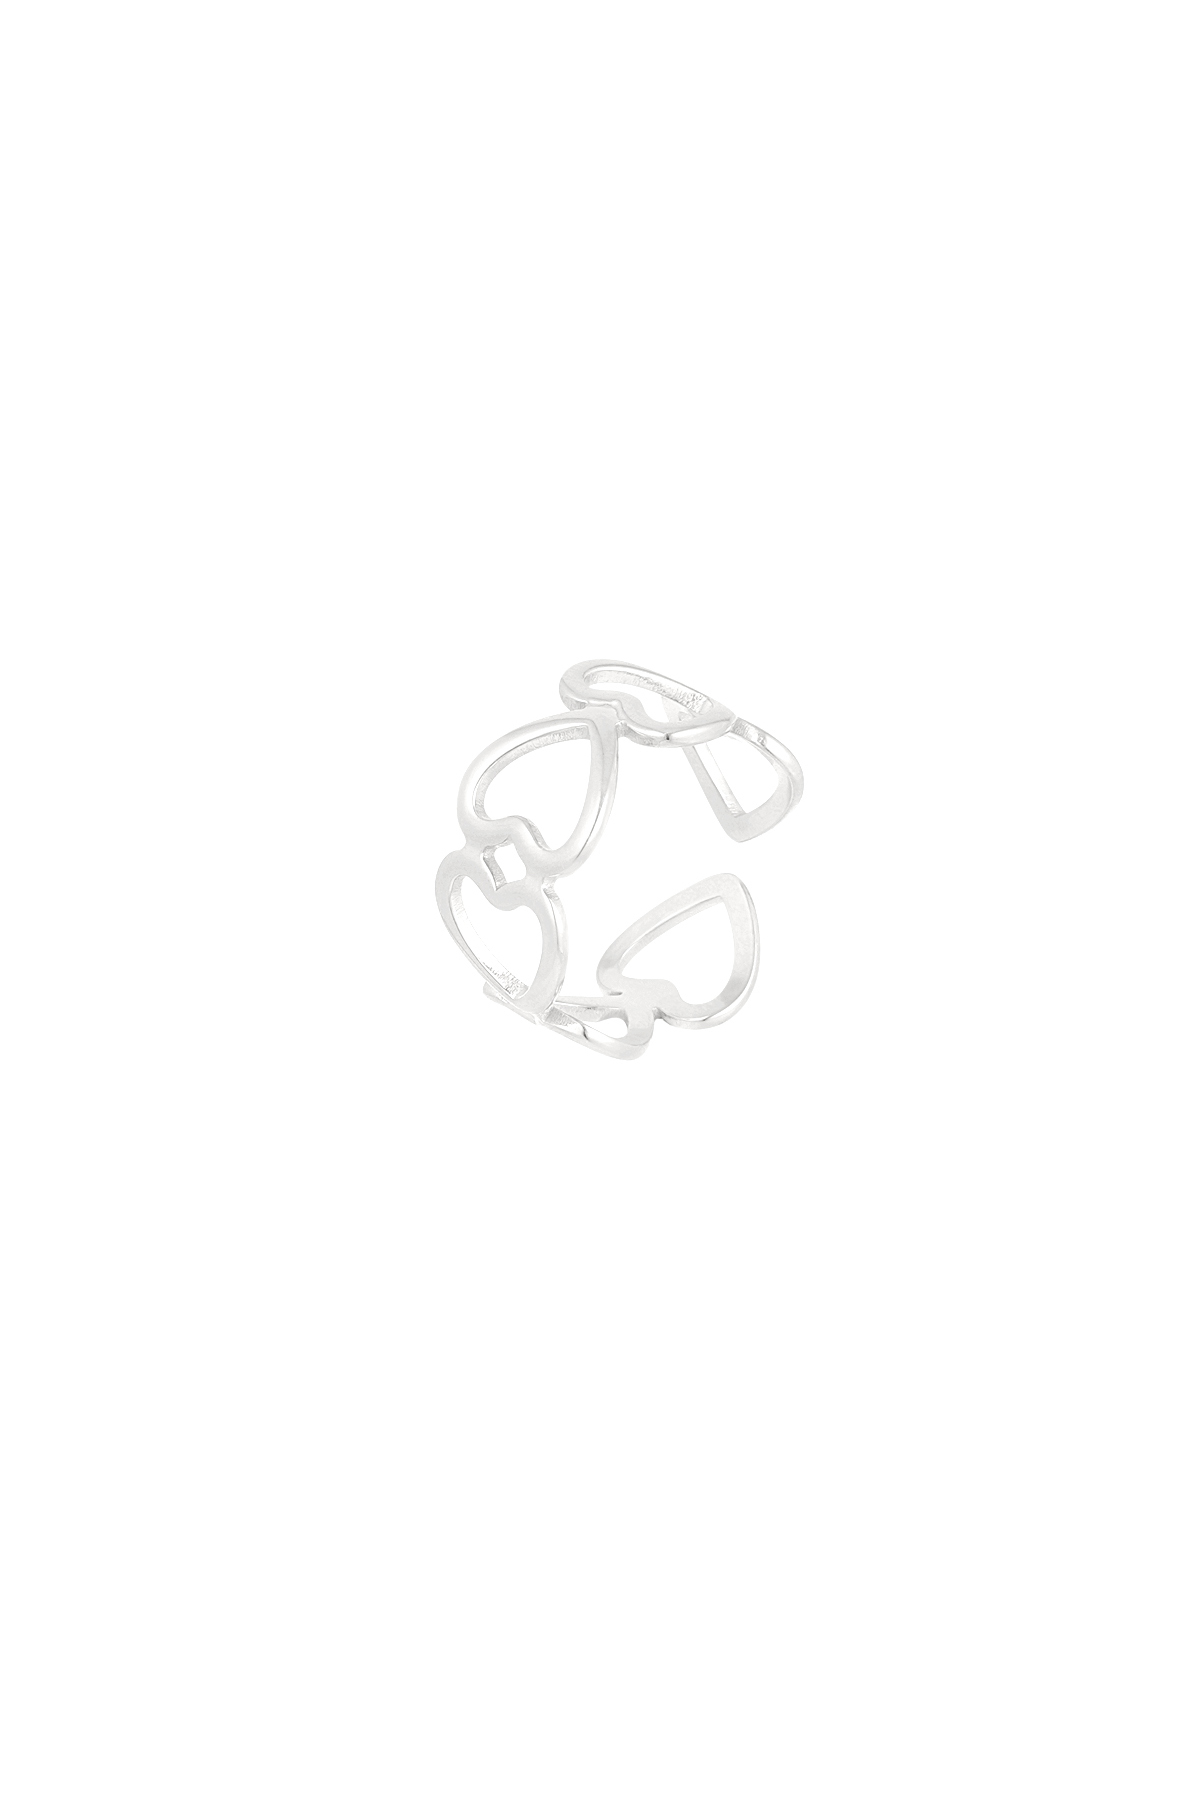 Ring heart connected - silver h5 Picture4